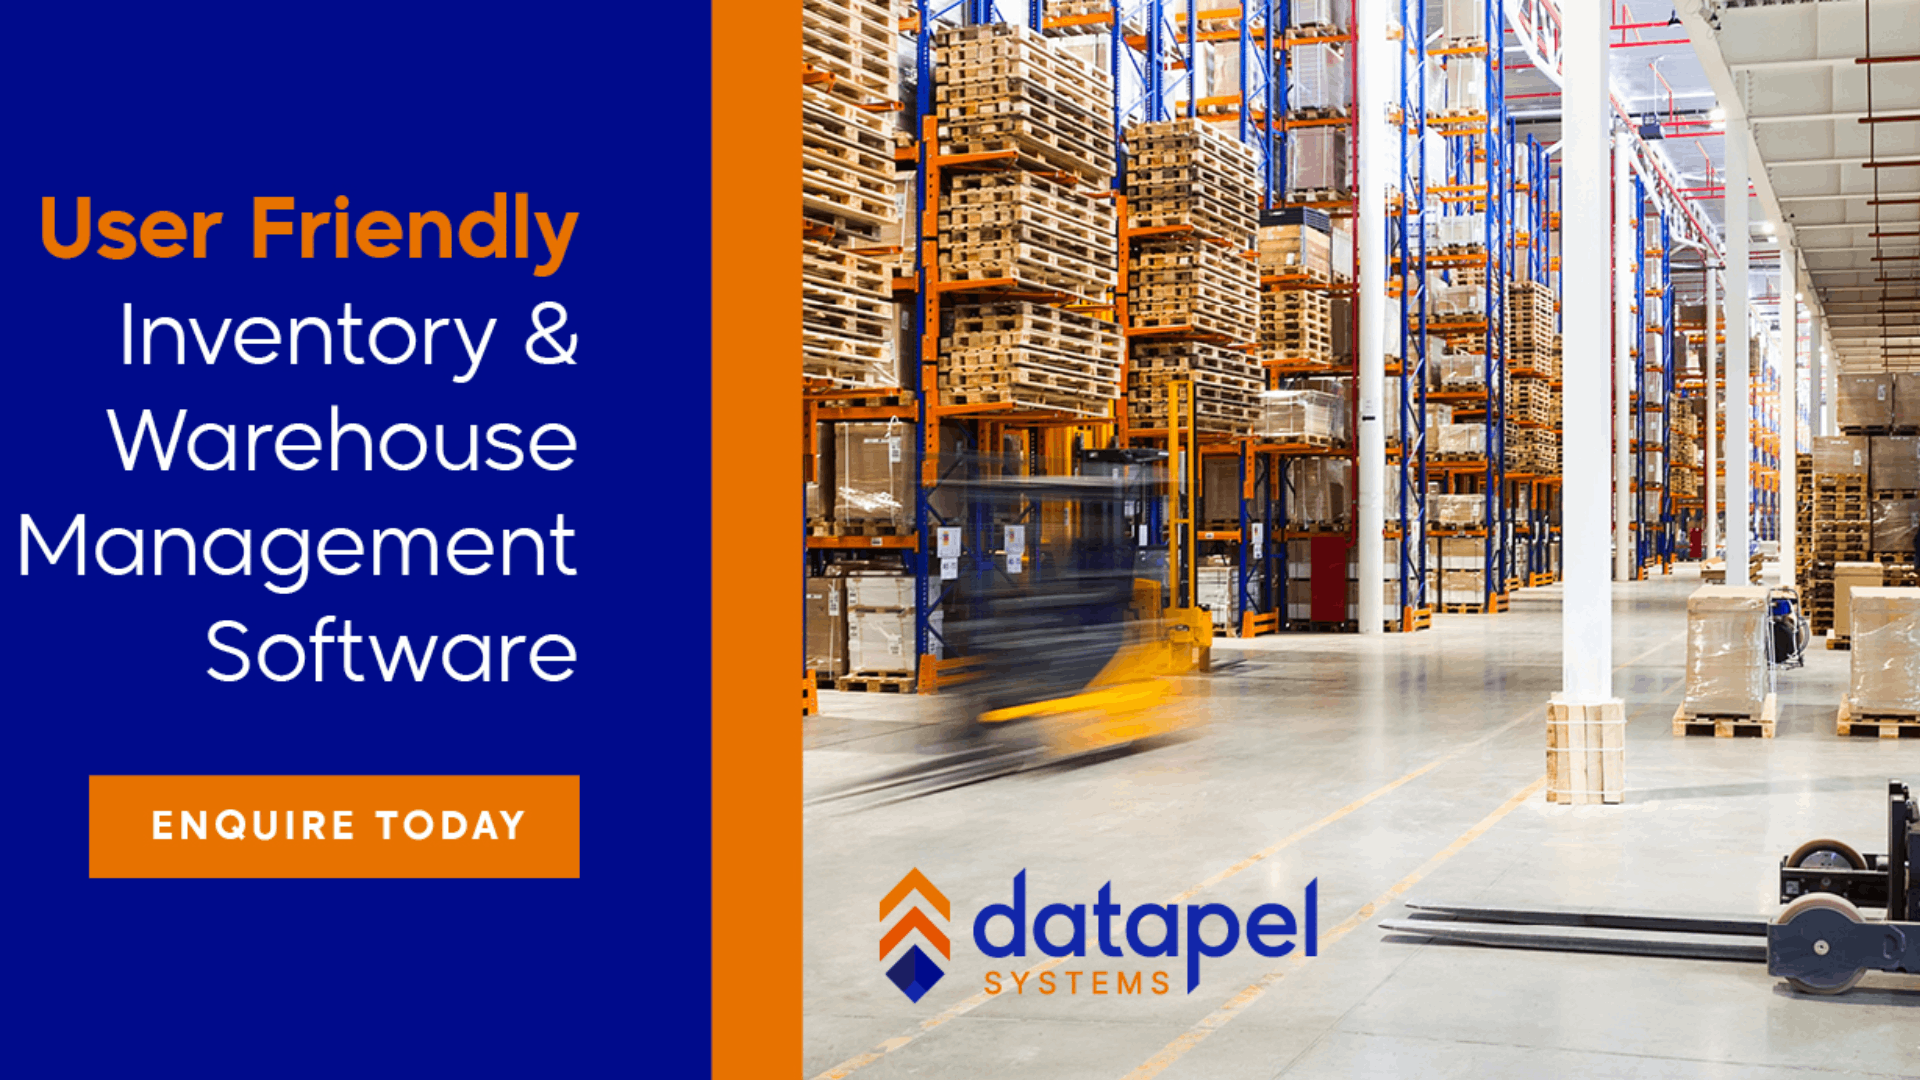 Datapel Systems Awarded Best Inventory Management Software by World Future Awards